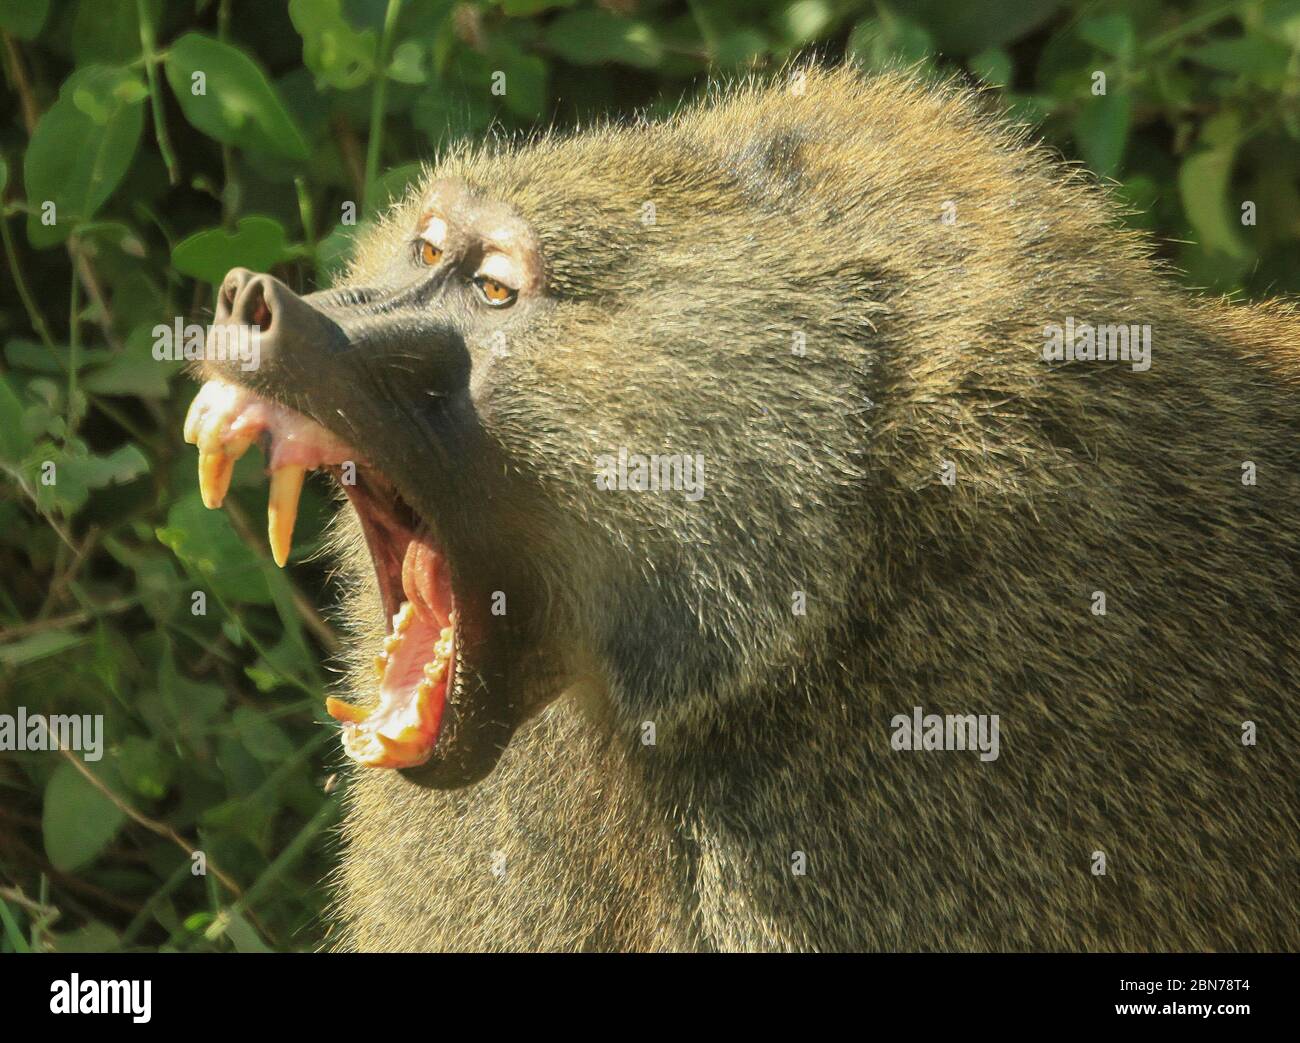 Large aggressive male Olive Baboon (Papio anubis), growling with open mouth Photographed at Serengeti National Park, Tanzania Stock Photo